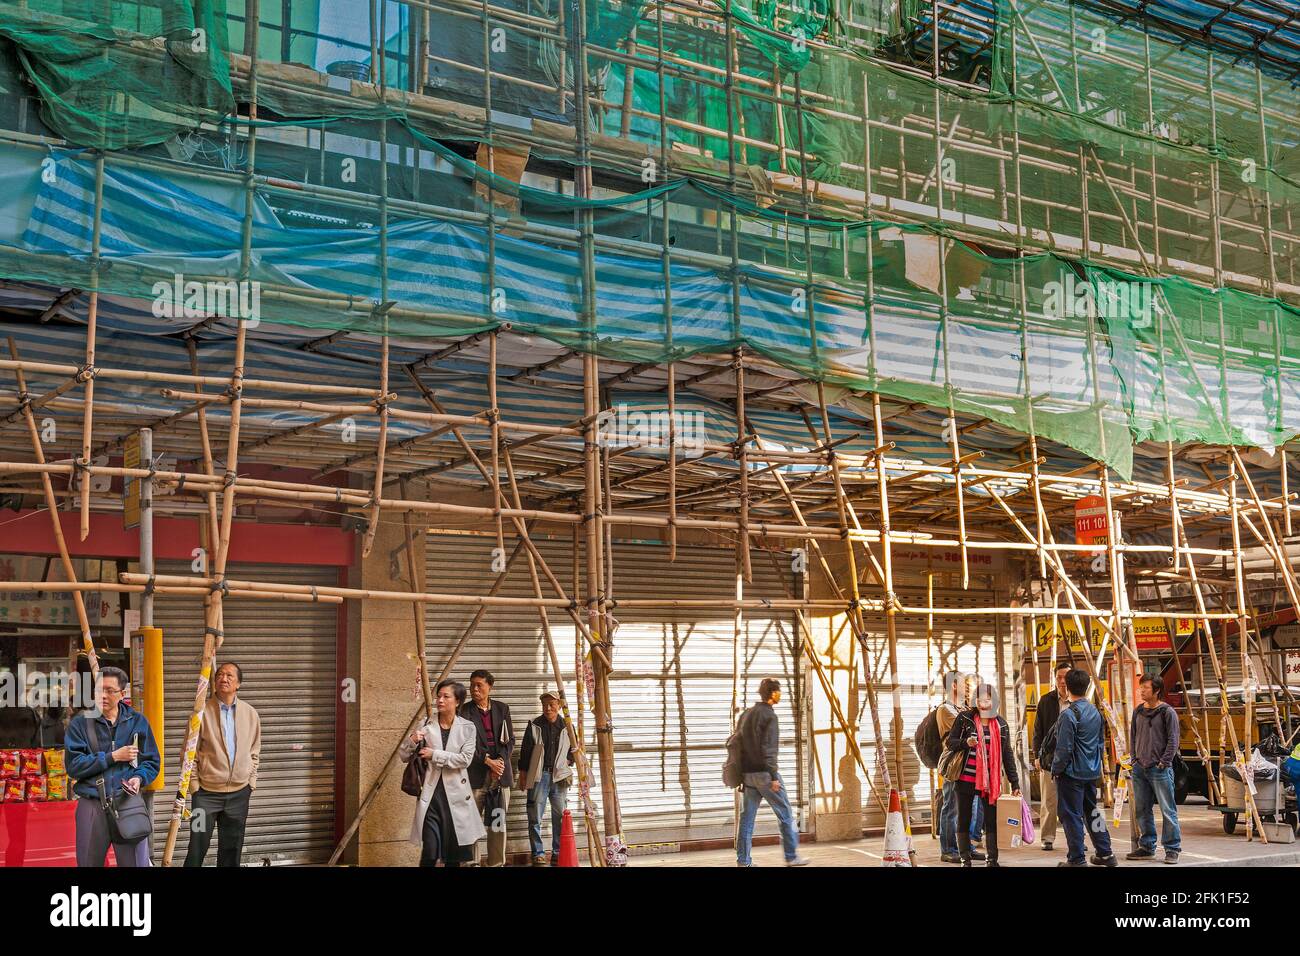 Hong Kong, Hong Kong Island, China, Asia - People at a bus stop under a building wrapped in traditional Chinese scaffolding Stock Photo